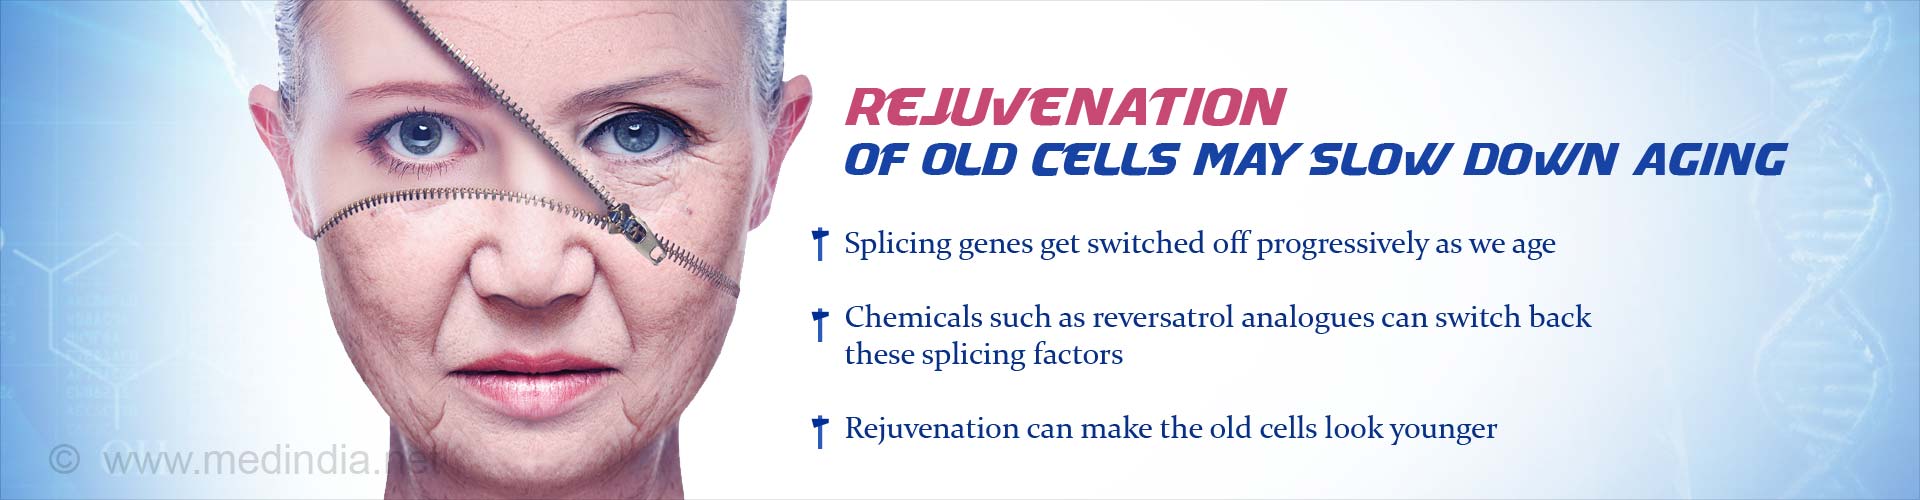 rejuvenation of old cells may slow down aging
- splicing genes get switched off progressively as we age
- chemicals such as reversatrol analogues can switch back these splicing factors
- rejuvenation can make the old cells look younger